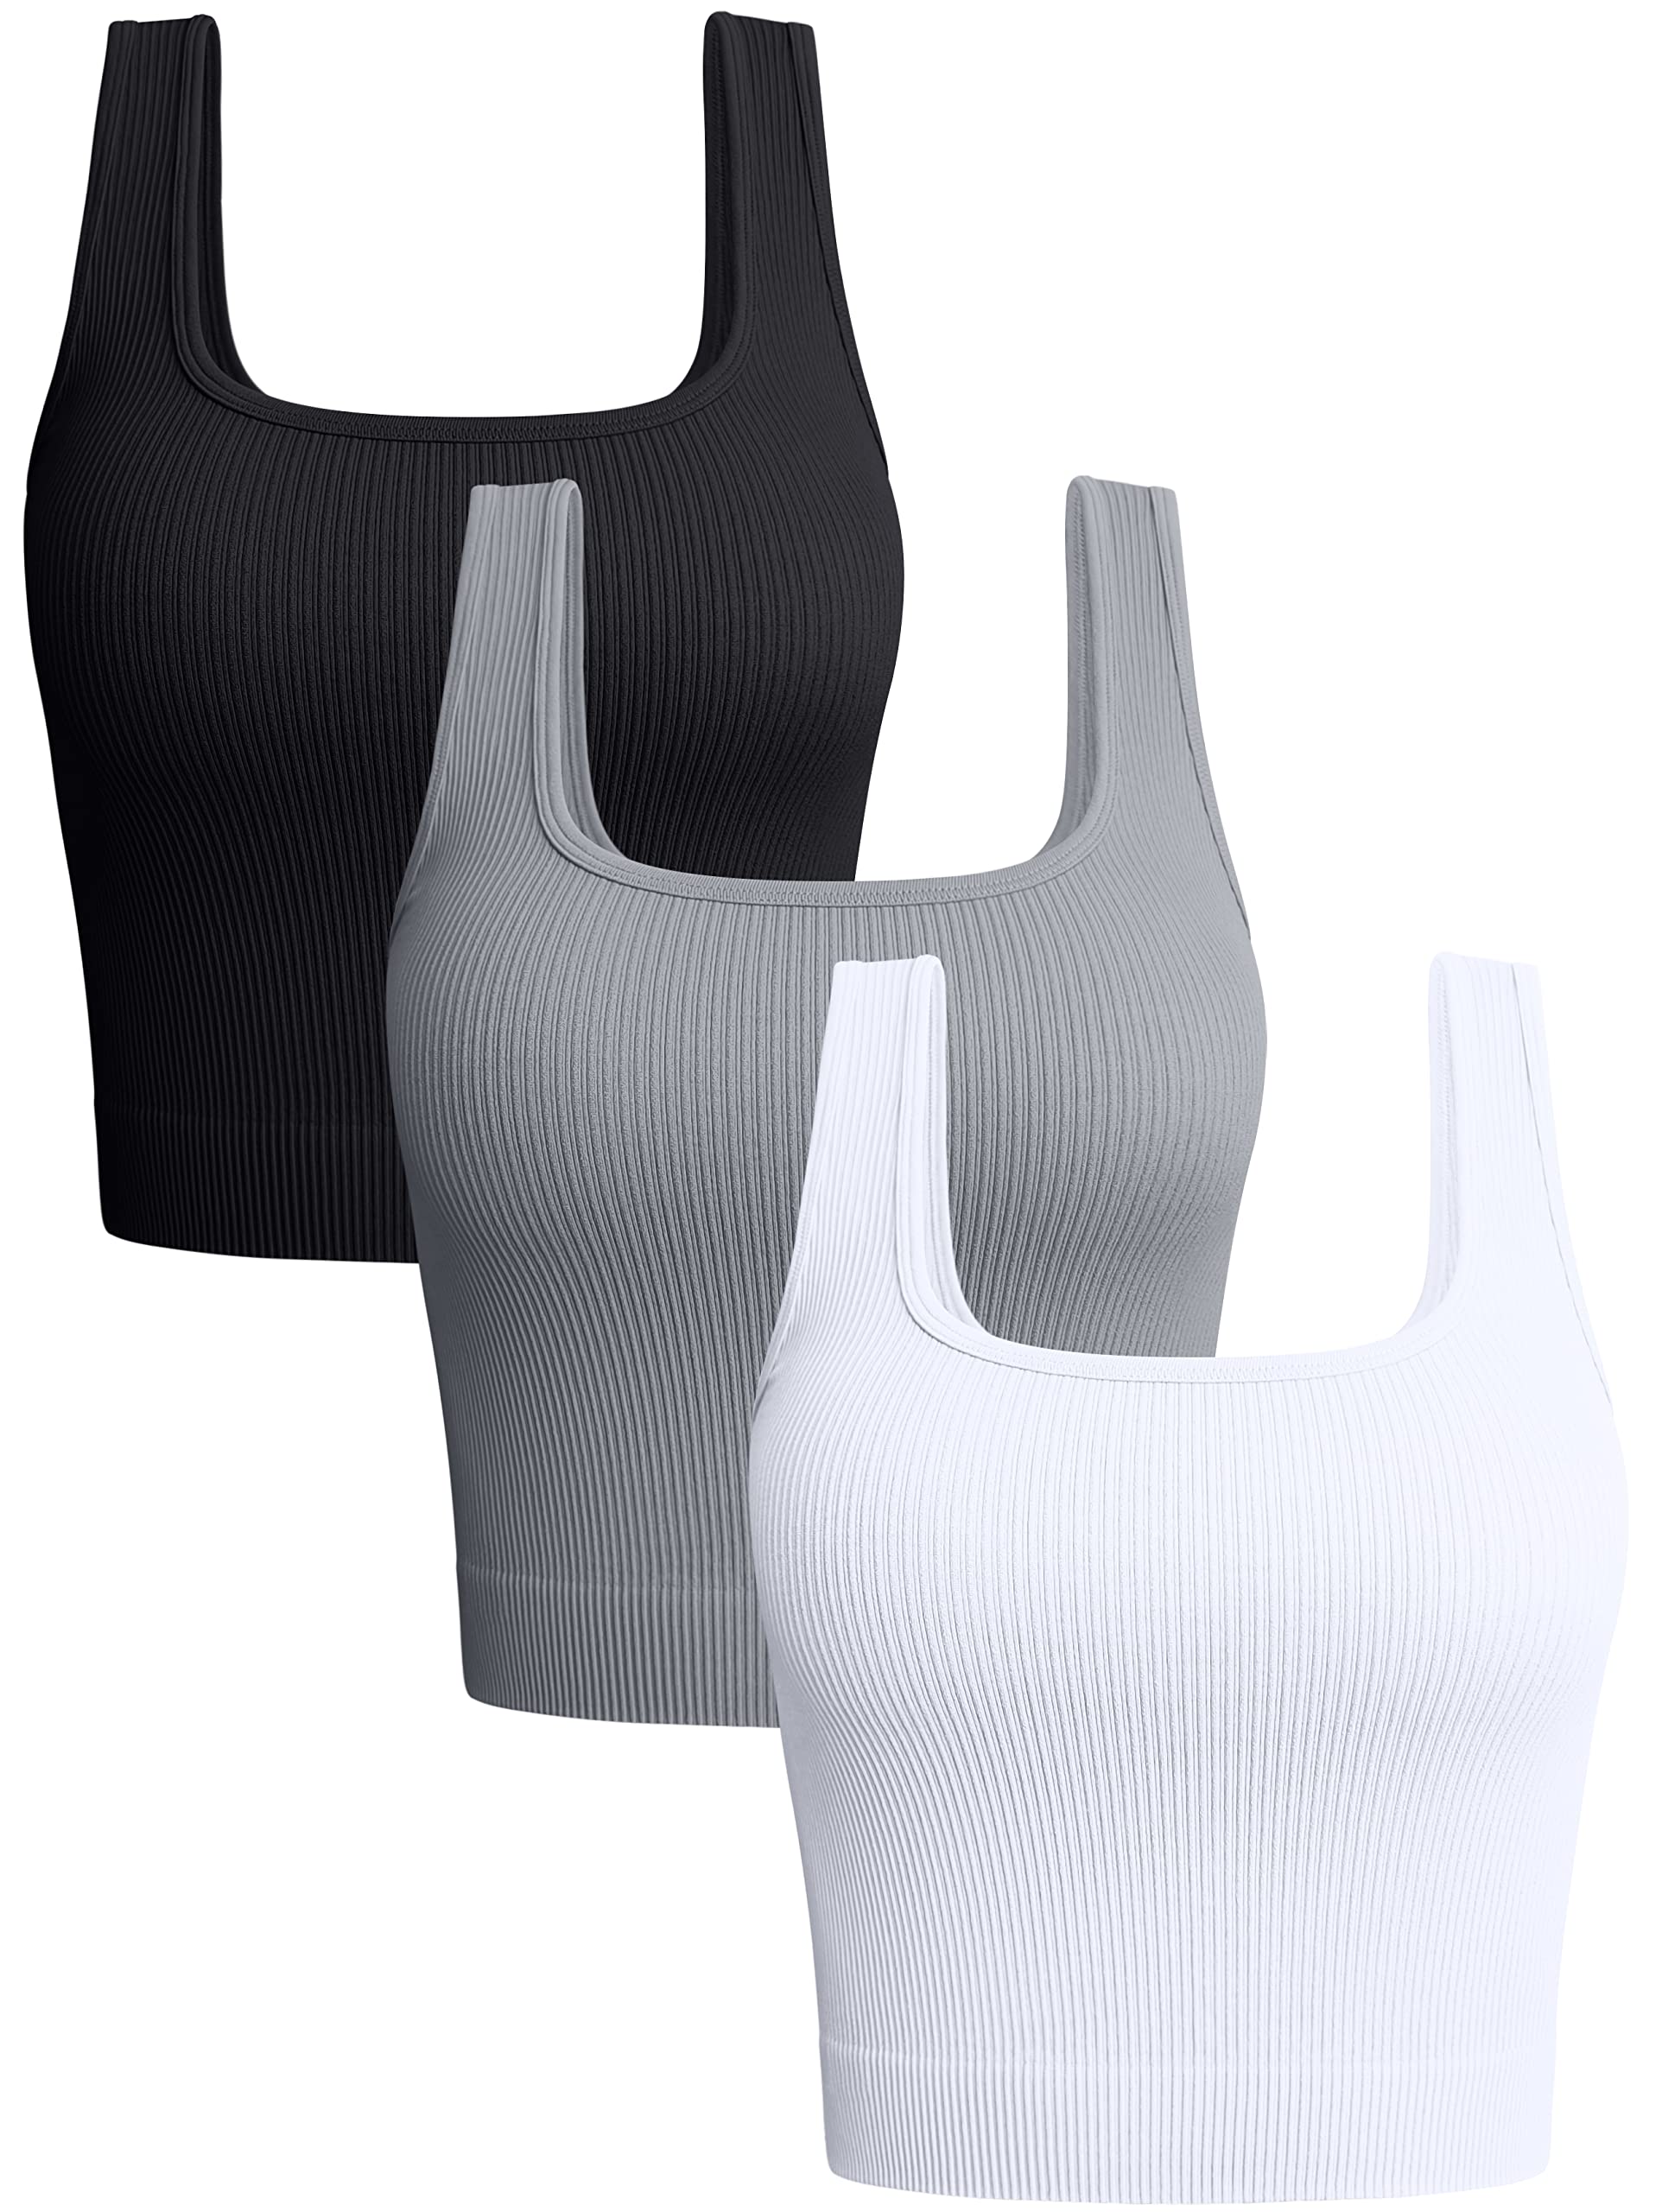 OQQ Women's 3 Piece Tank Tops Ribbed Seamless Workout Exercise Shirts Yoga Crop Tops Black Grey White